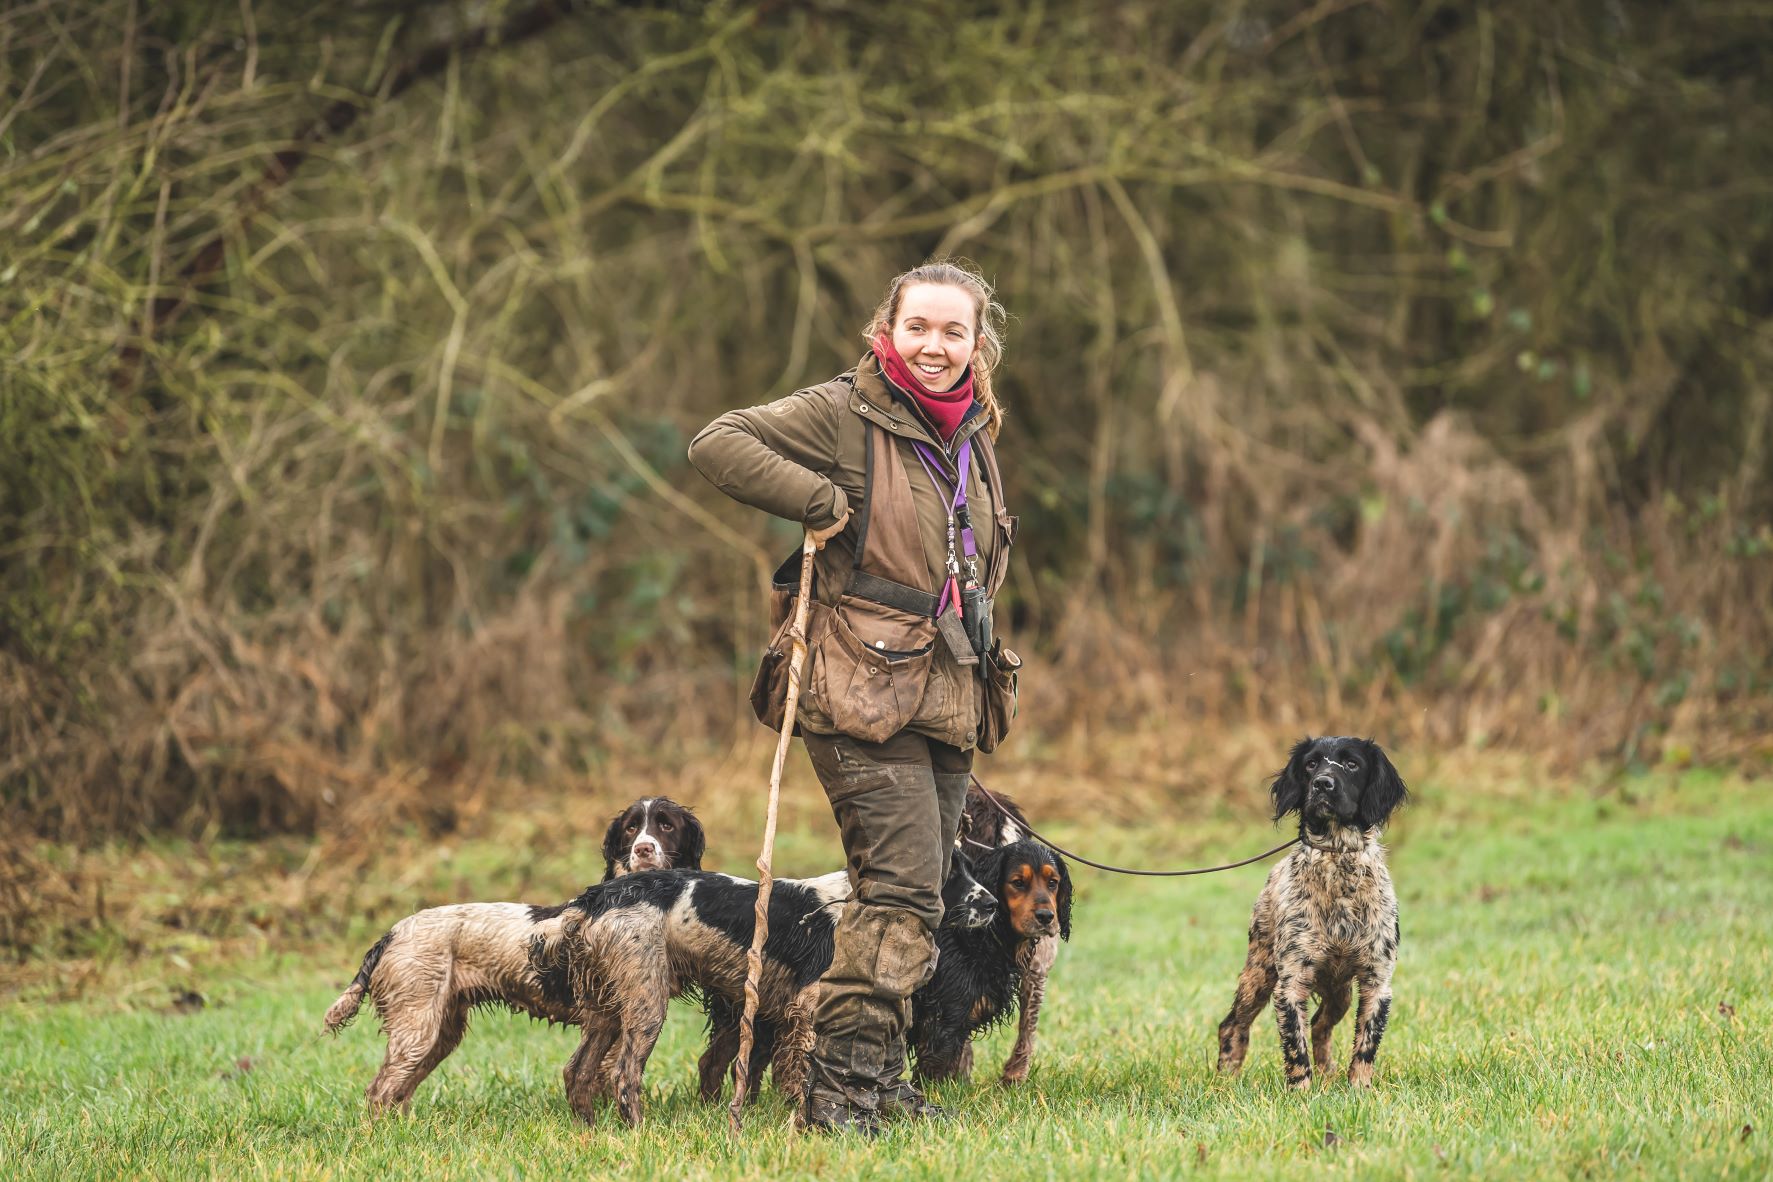 woman in tweed in grassy field surrounded by gundogs - mostly spaniels